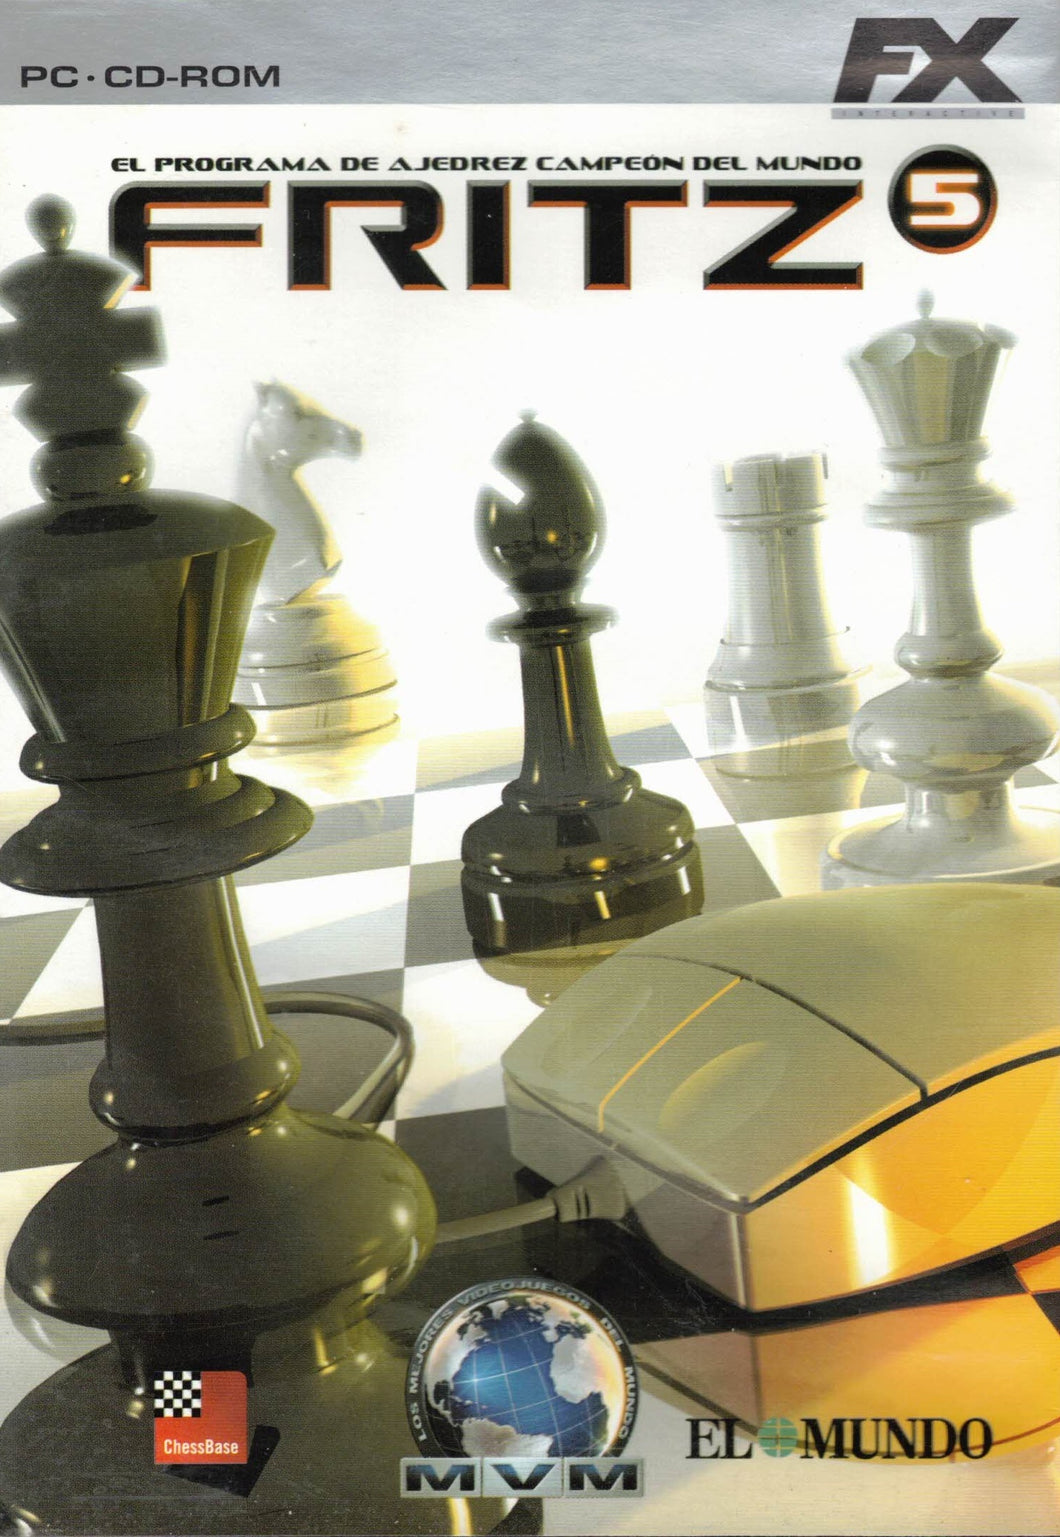 Fritz 5 (PC CHESS GAME CD-ROM) C-202 (very good second hand)